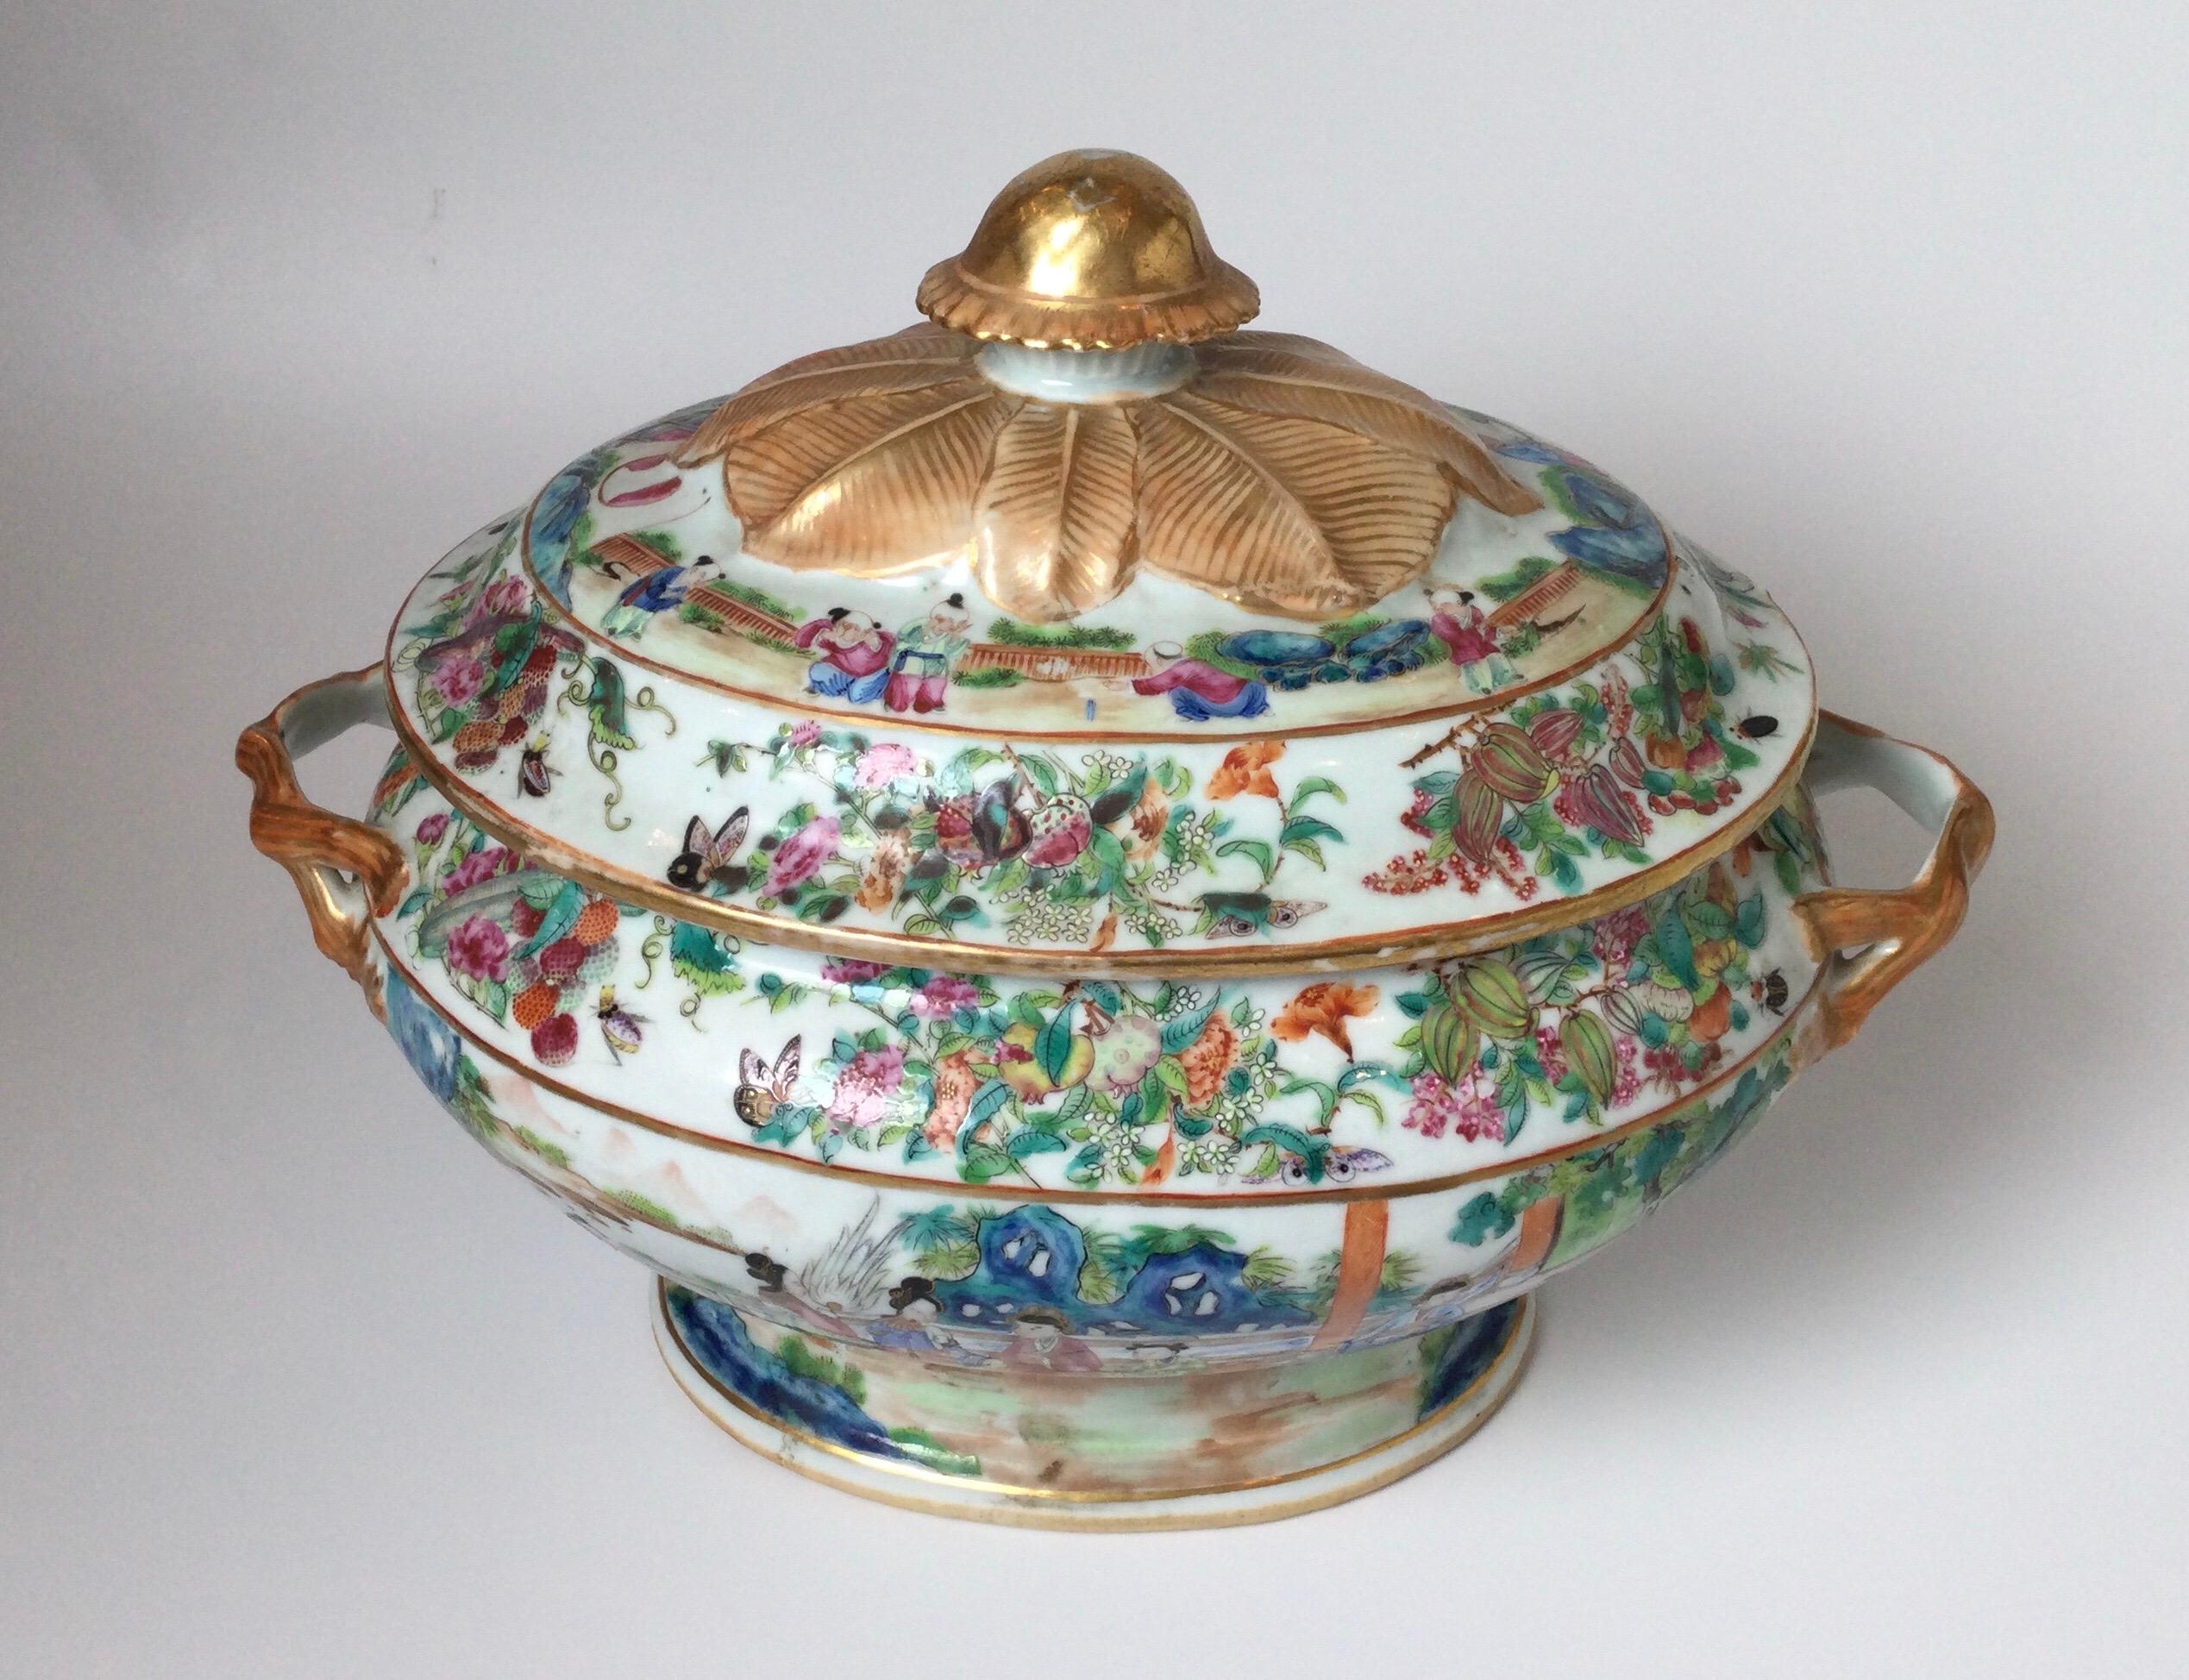 Chinese Export Mid 19th Century Chines Export Large Pedestal Tureen